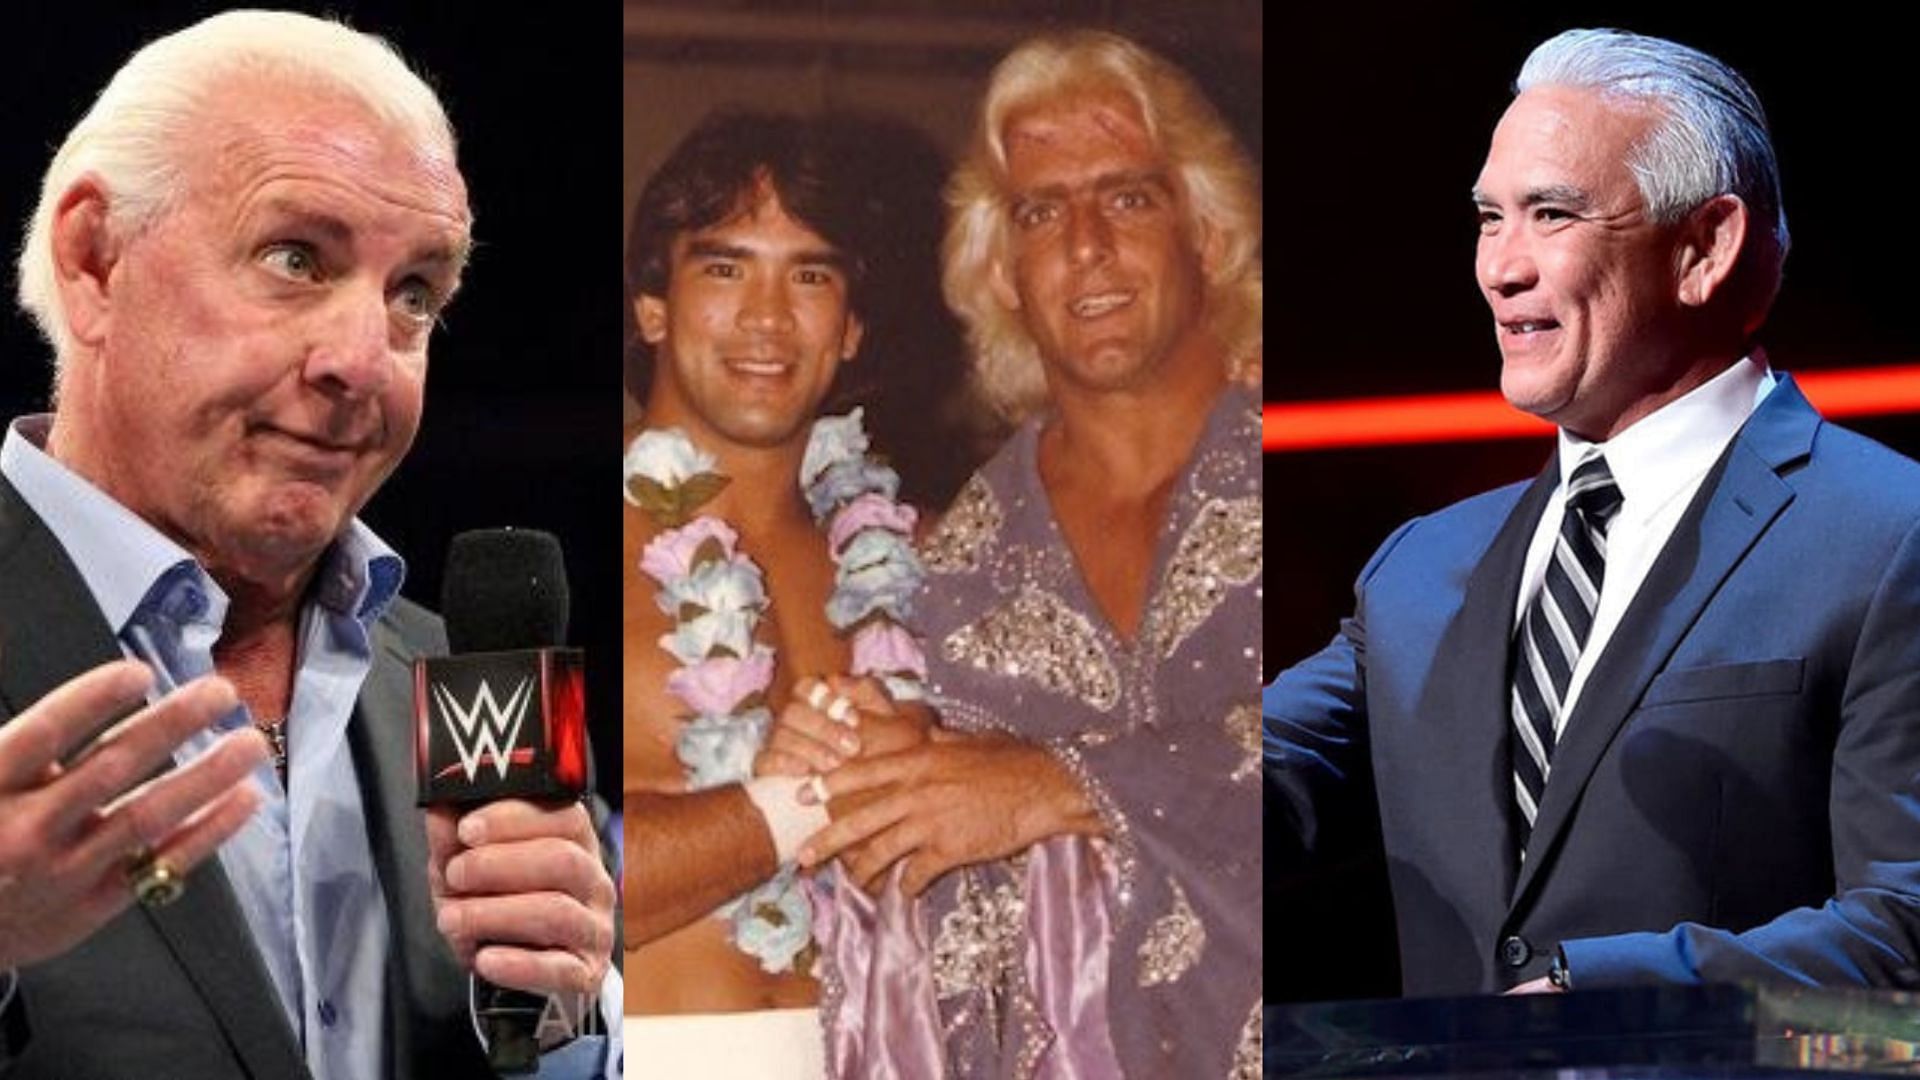 WWE Hall of Famers Ric Flair and Ricky Steamboat